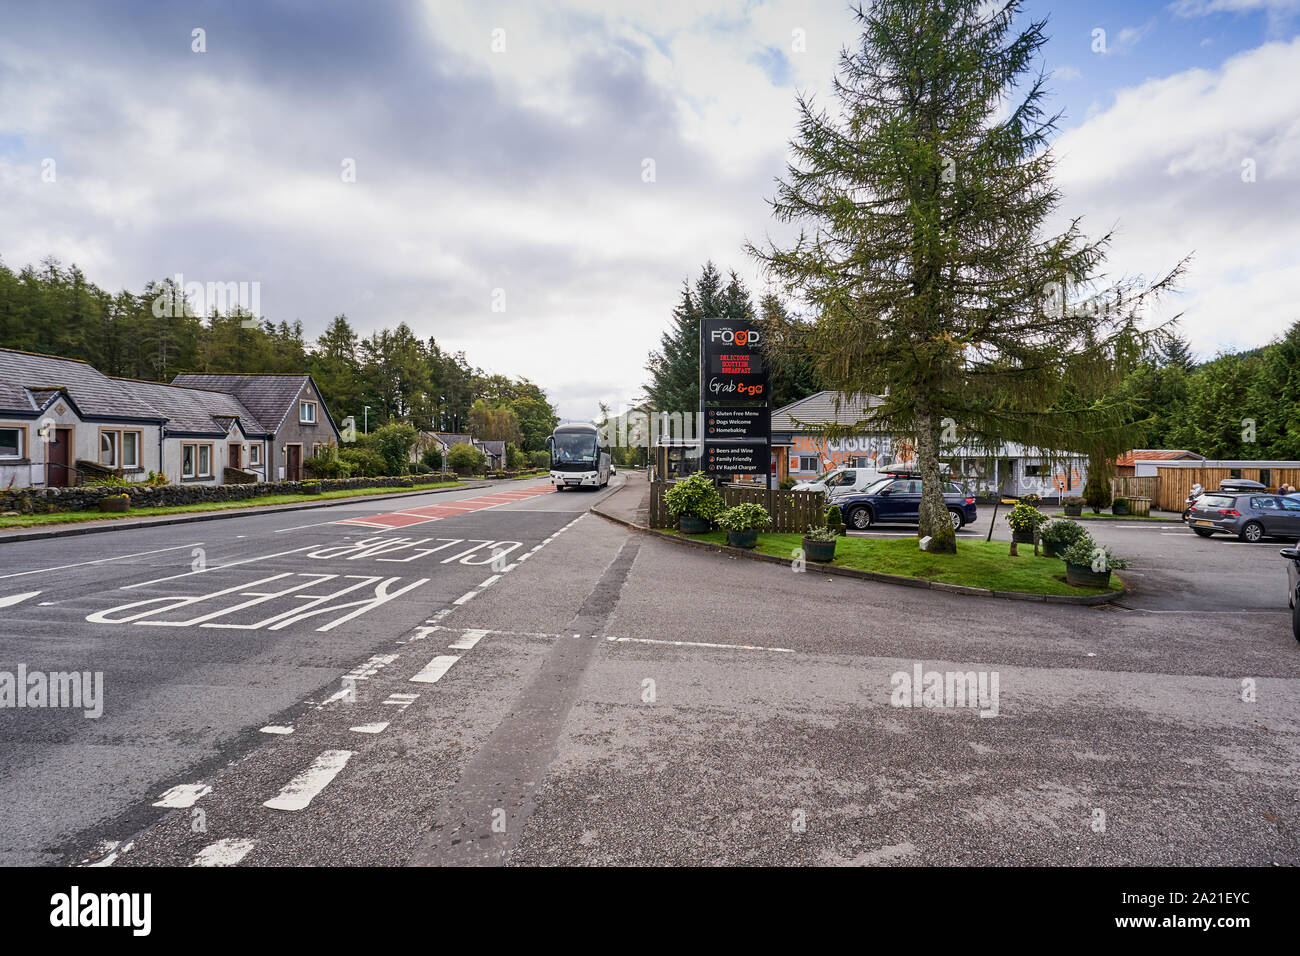 The Real Food Cafe, Tyndrum, Crianlarich, Scotland showing main street. Stock Photo